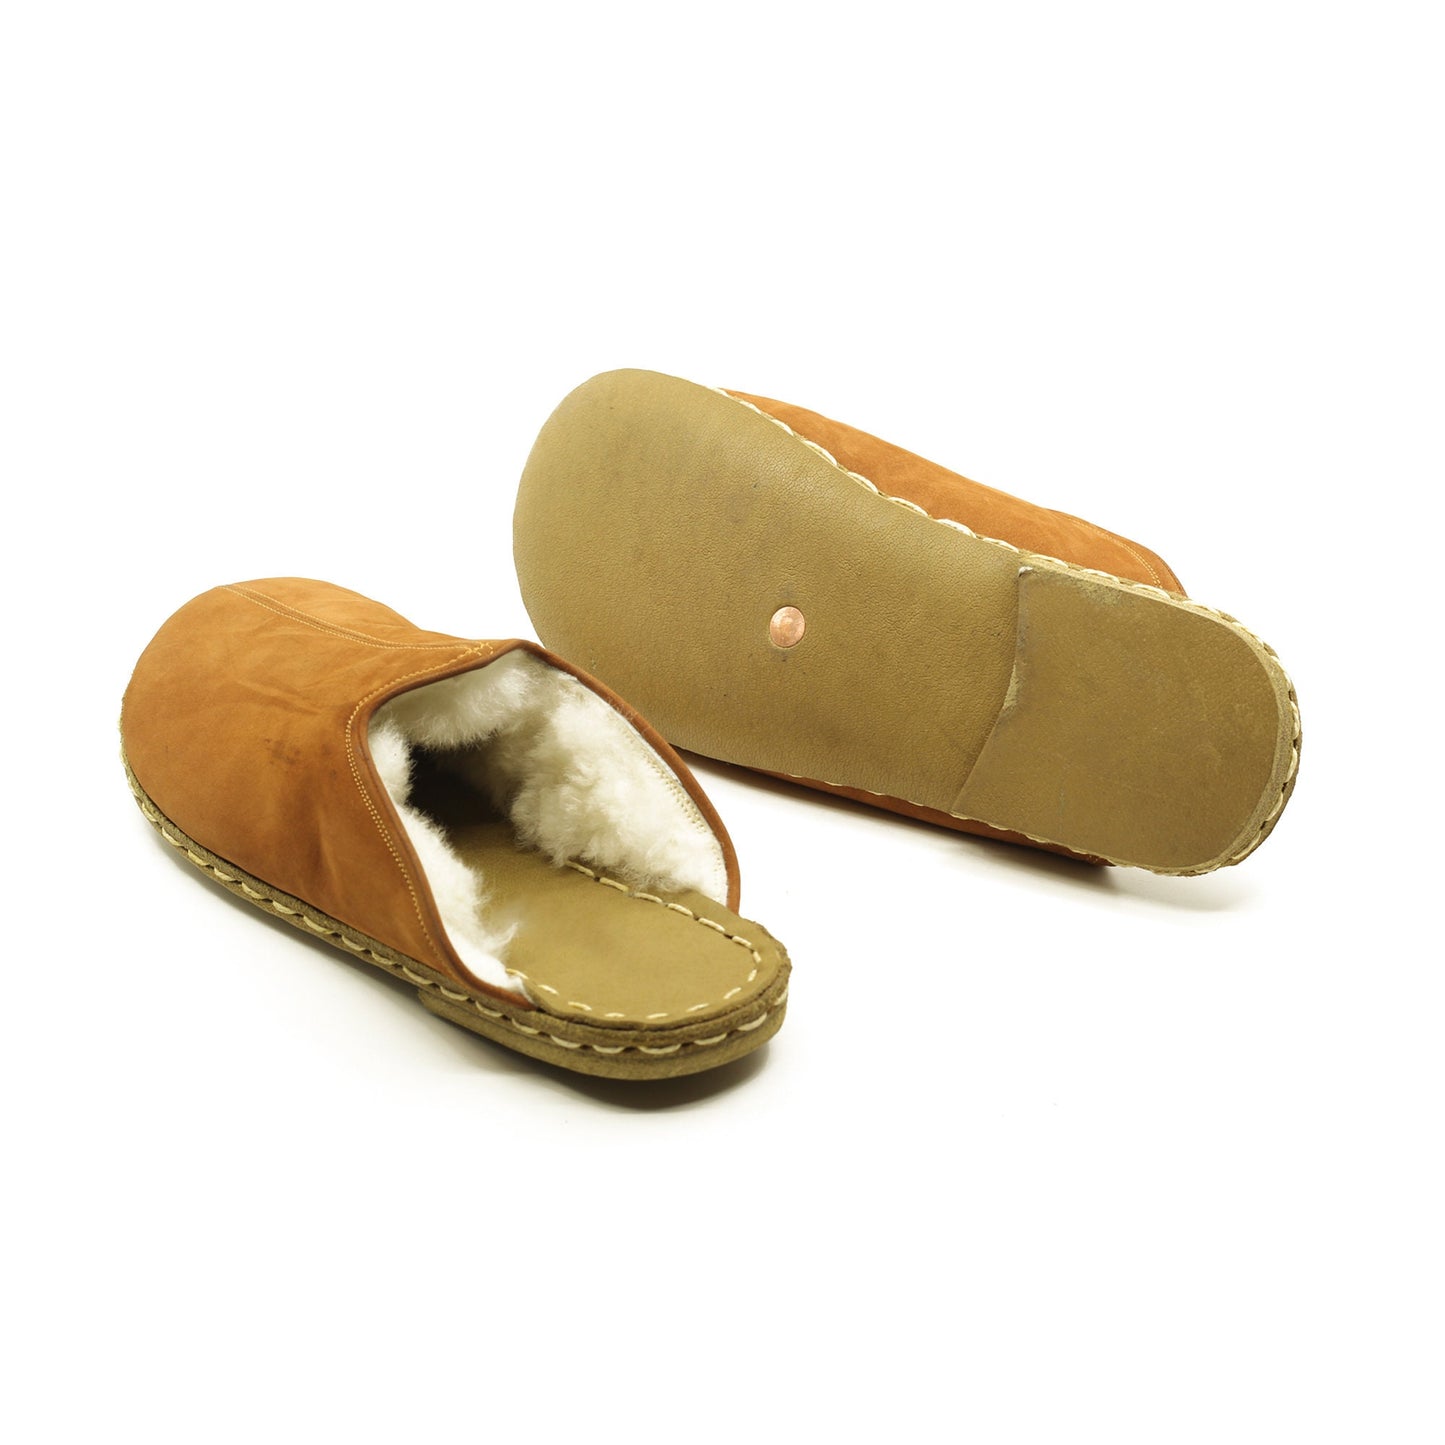 Barefoot - close toed slippers - Brown Nubuck Leather - Winter Slippers - Sheepskin slippers - For Women